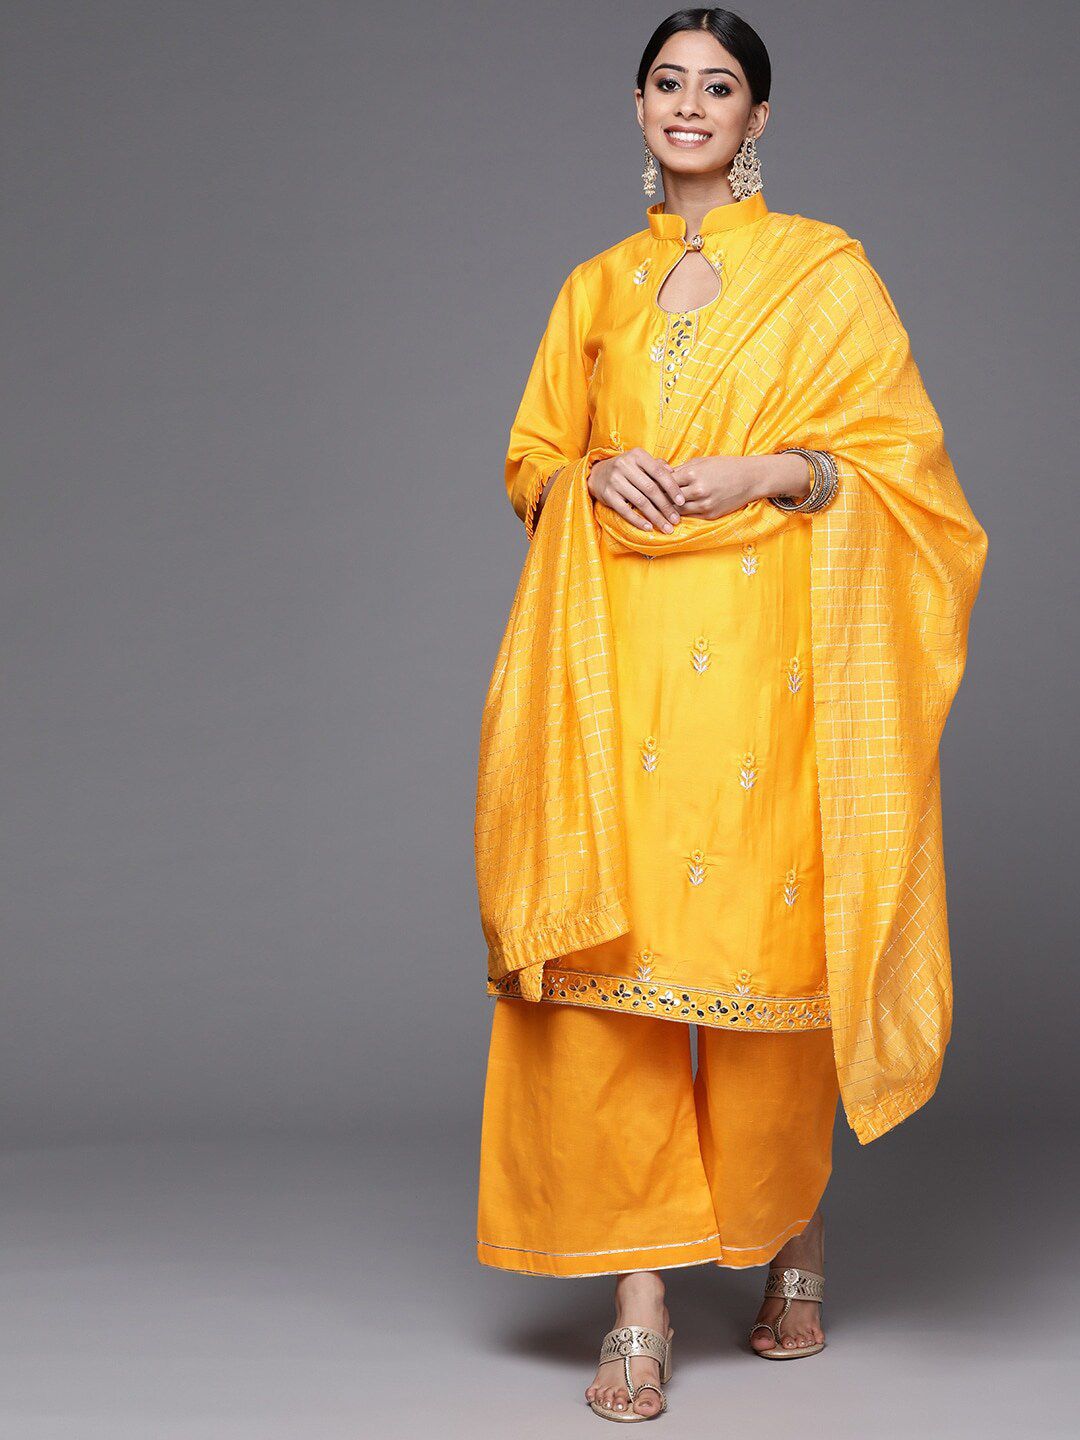 Chhabra 555 Women Yellow & Silver-Toned Embroidered Semi-Stitched Dress Material Price in India